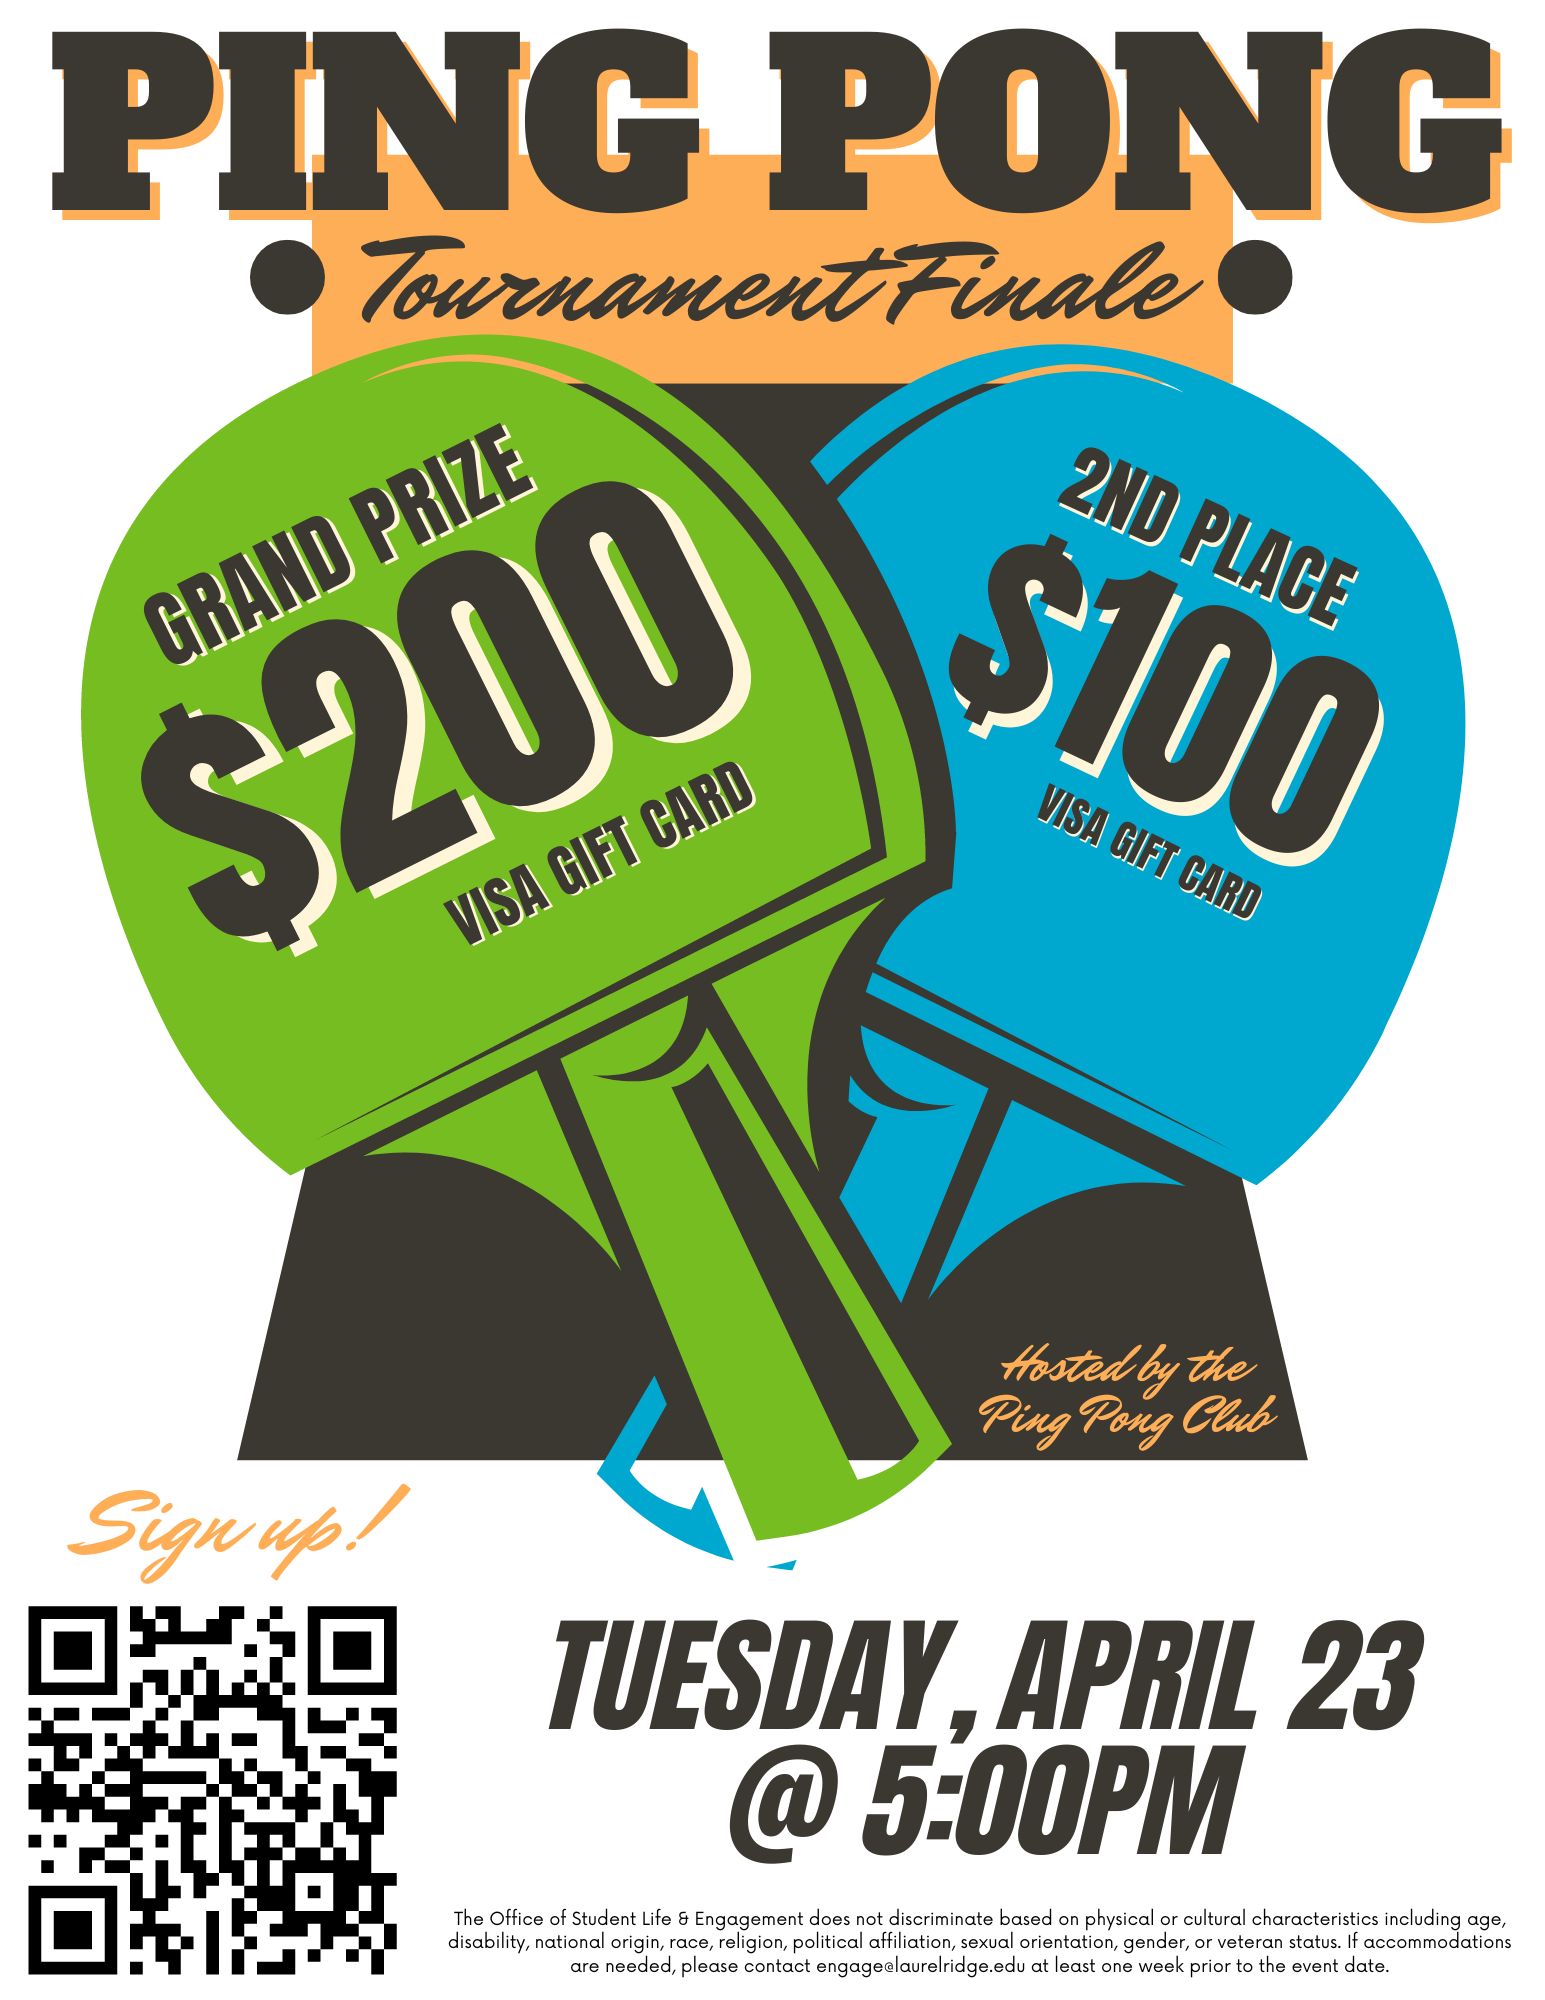 Ping Pong Tournament flyer